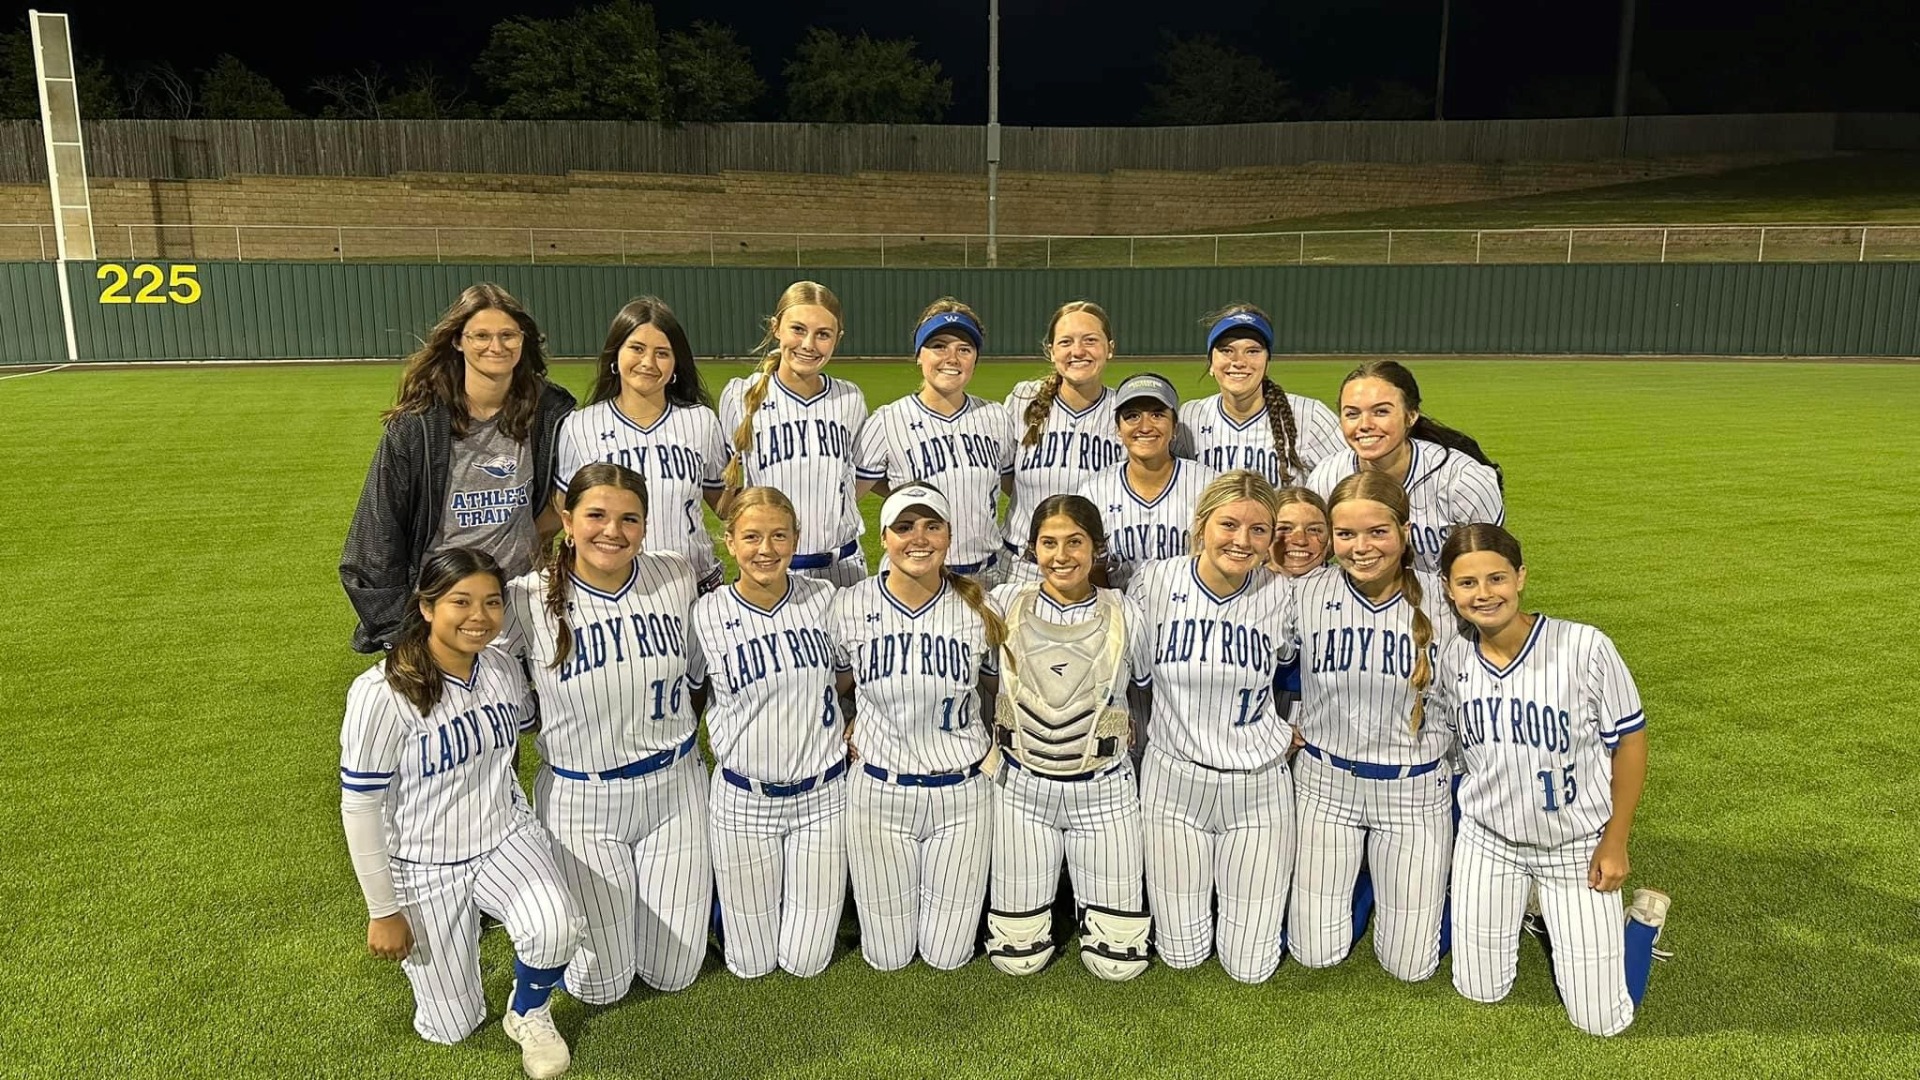 WeatherfordSlide 5 - Chandler and Kemp Lead the Lady Roos Over Boswell; Finish Second in District